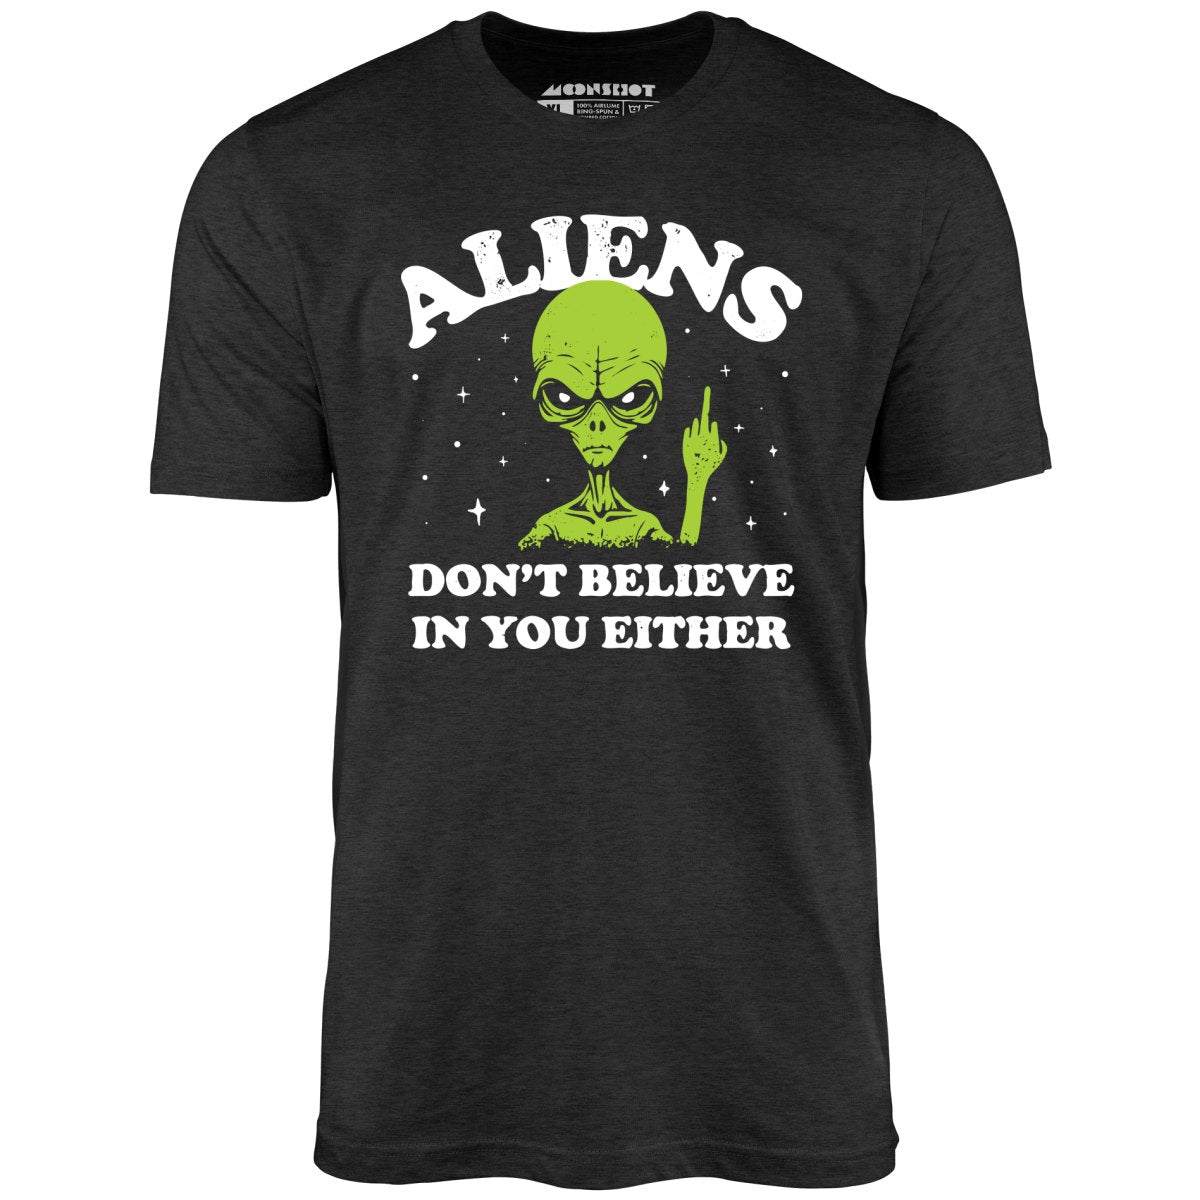 Aliens Don't Believe in You Either - Unisex T-Shirt